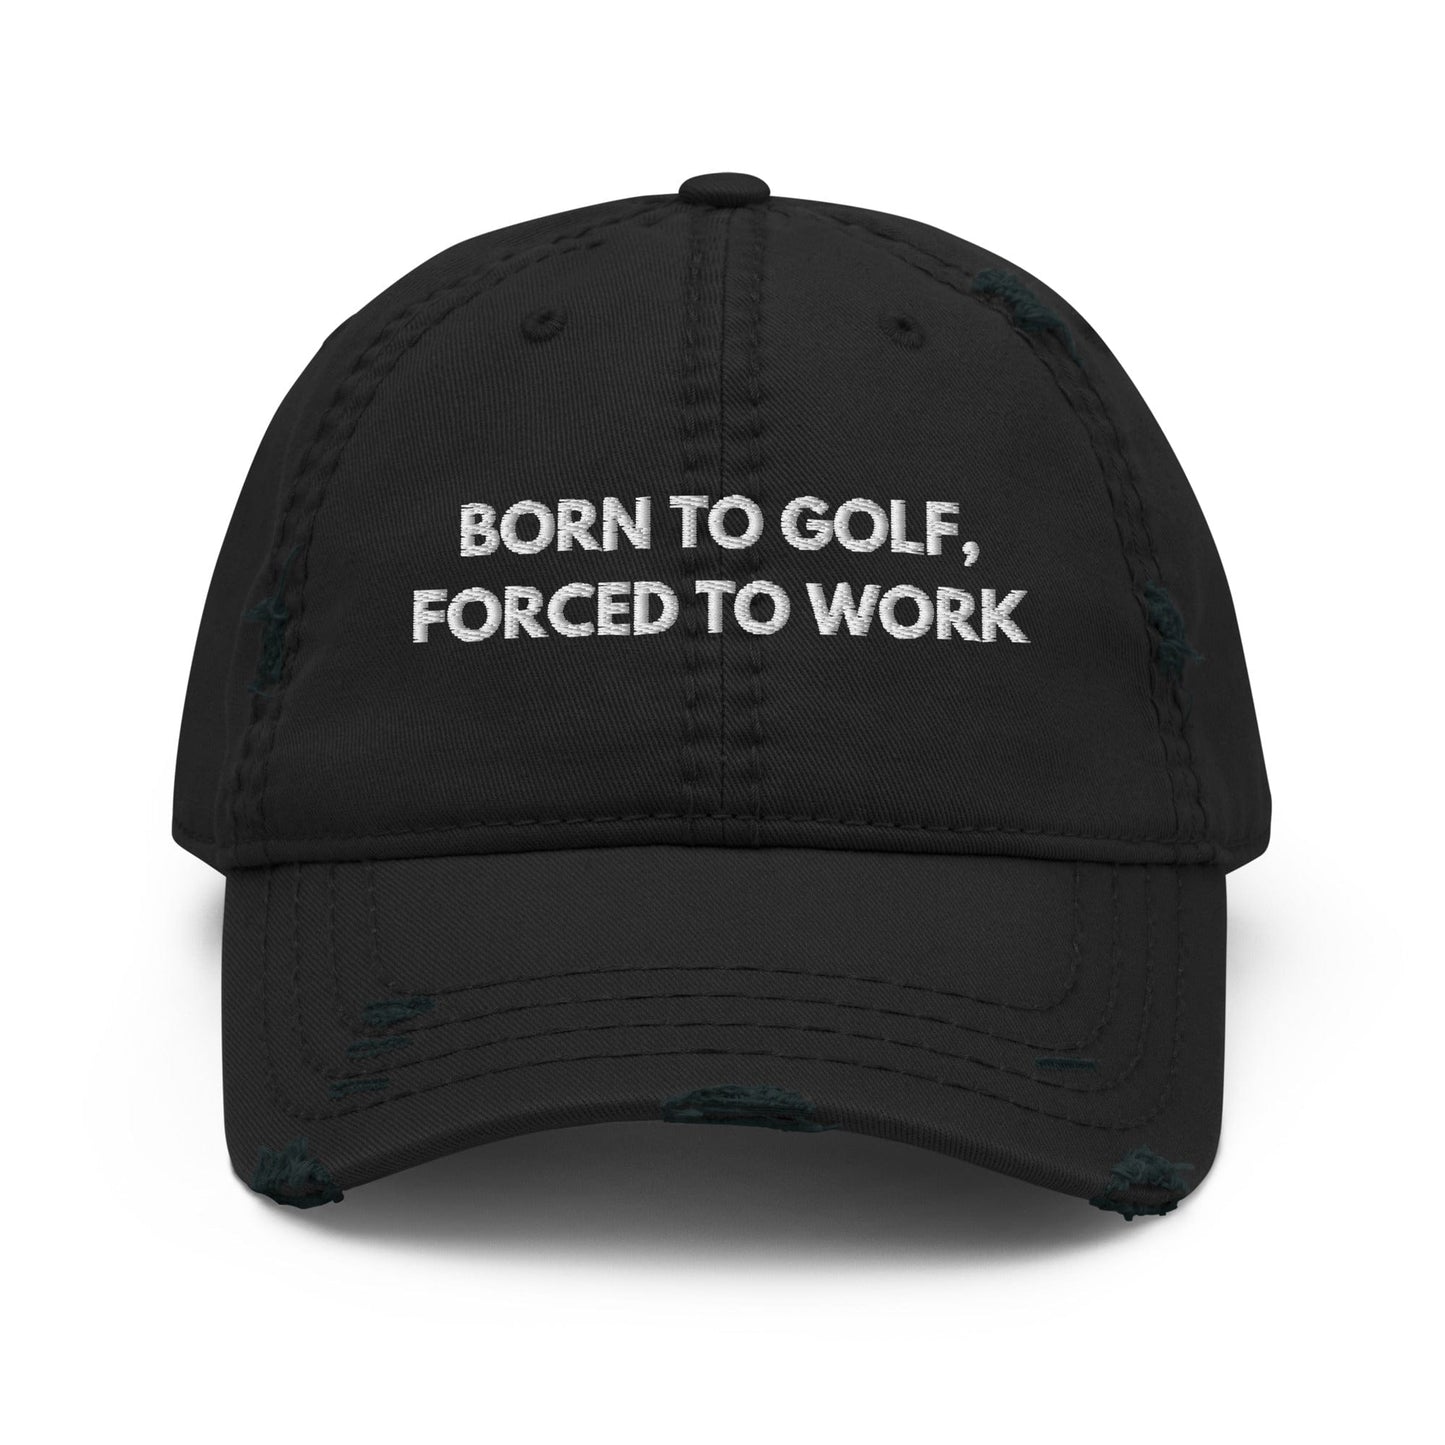 Funny Golfer Gifts  Distressed Cap Black Born to Golf, Forced To Work Hat Distressed Hat